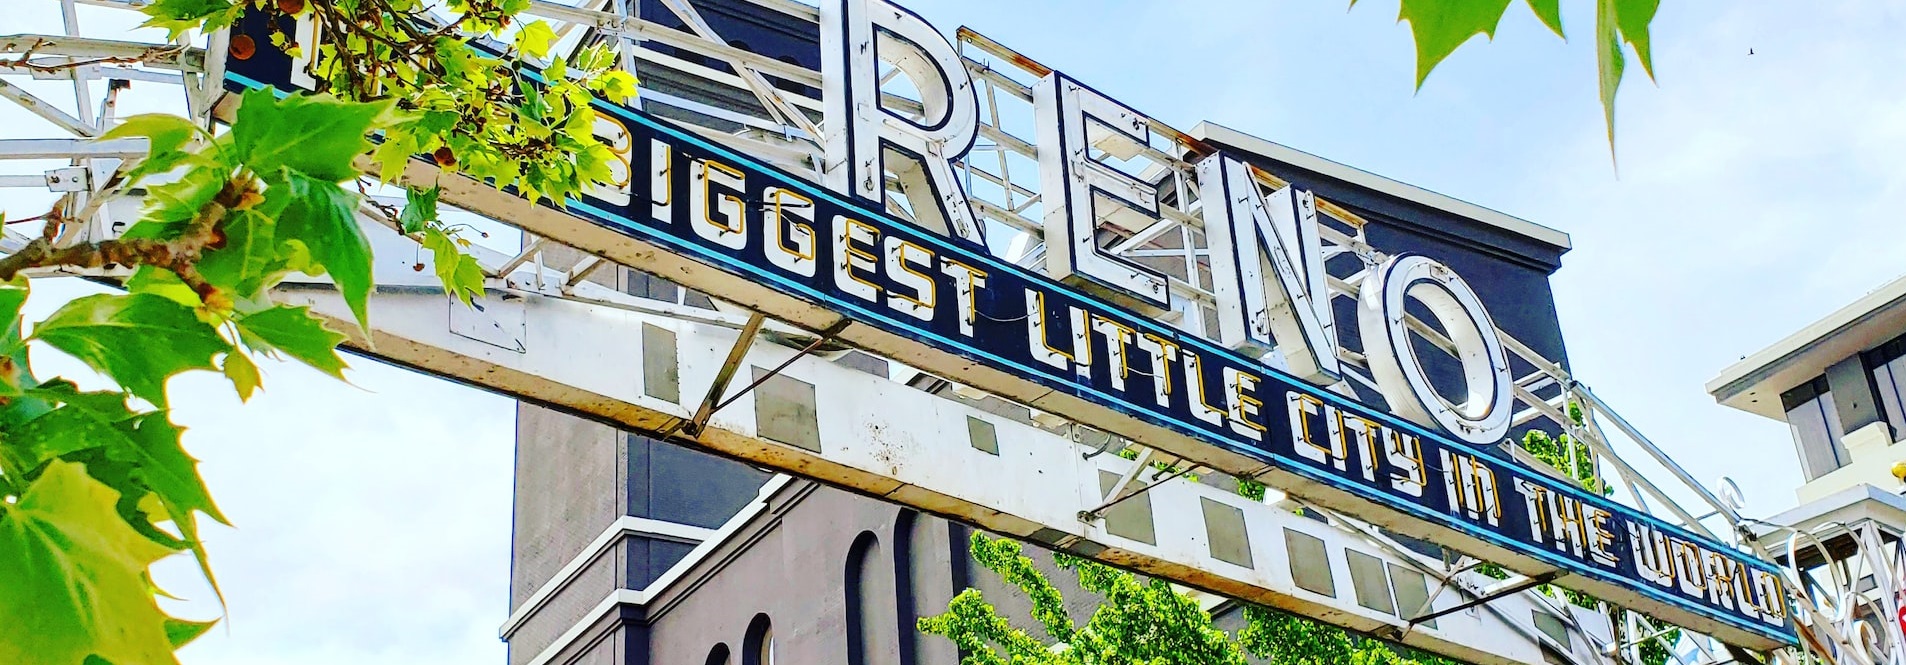 Biggest little city sign | Breast Cancer Car Donations